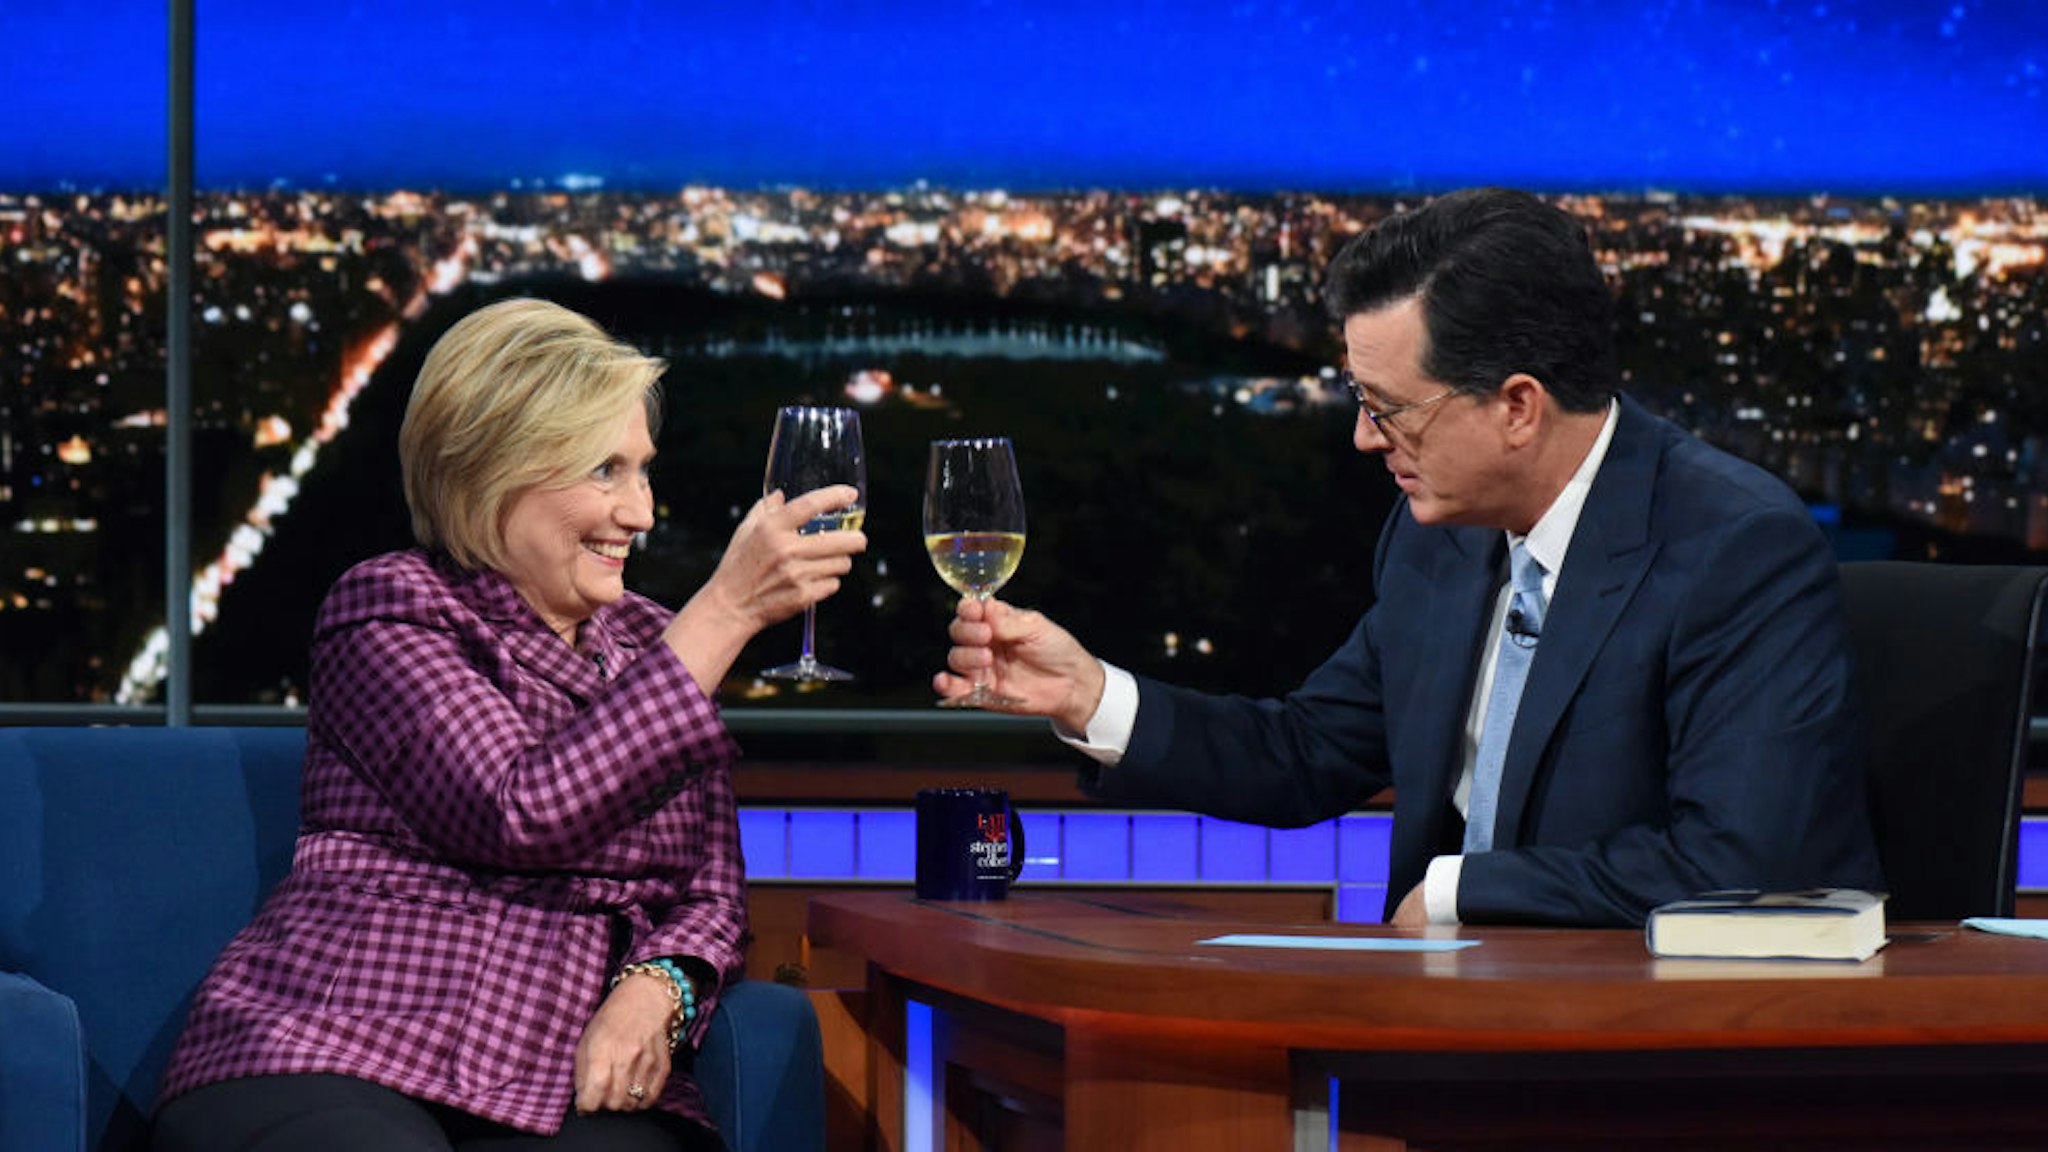 The Late Show with Stephen Colbert and guest Hillary Clinton during Tuesday's September 19, 2017 show. (Photo by Scott Kowalchyk/CBS via Getty Images)